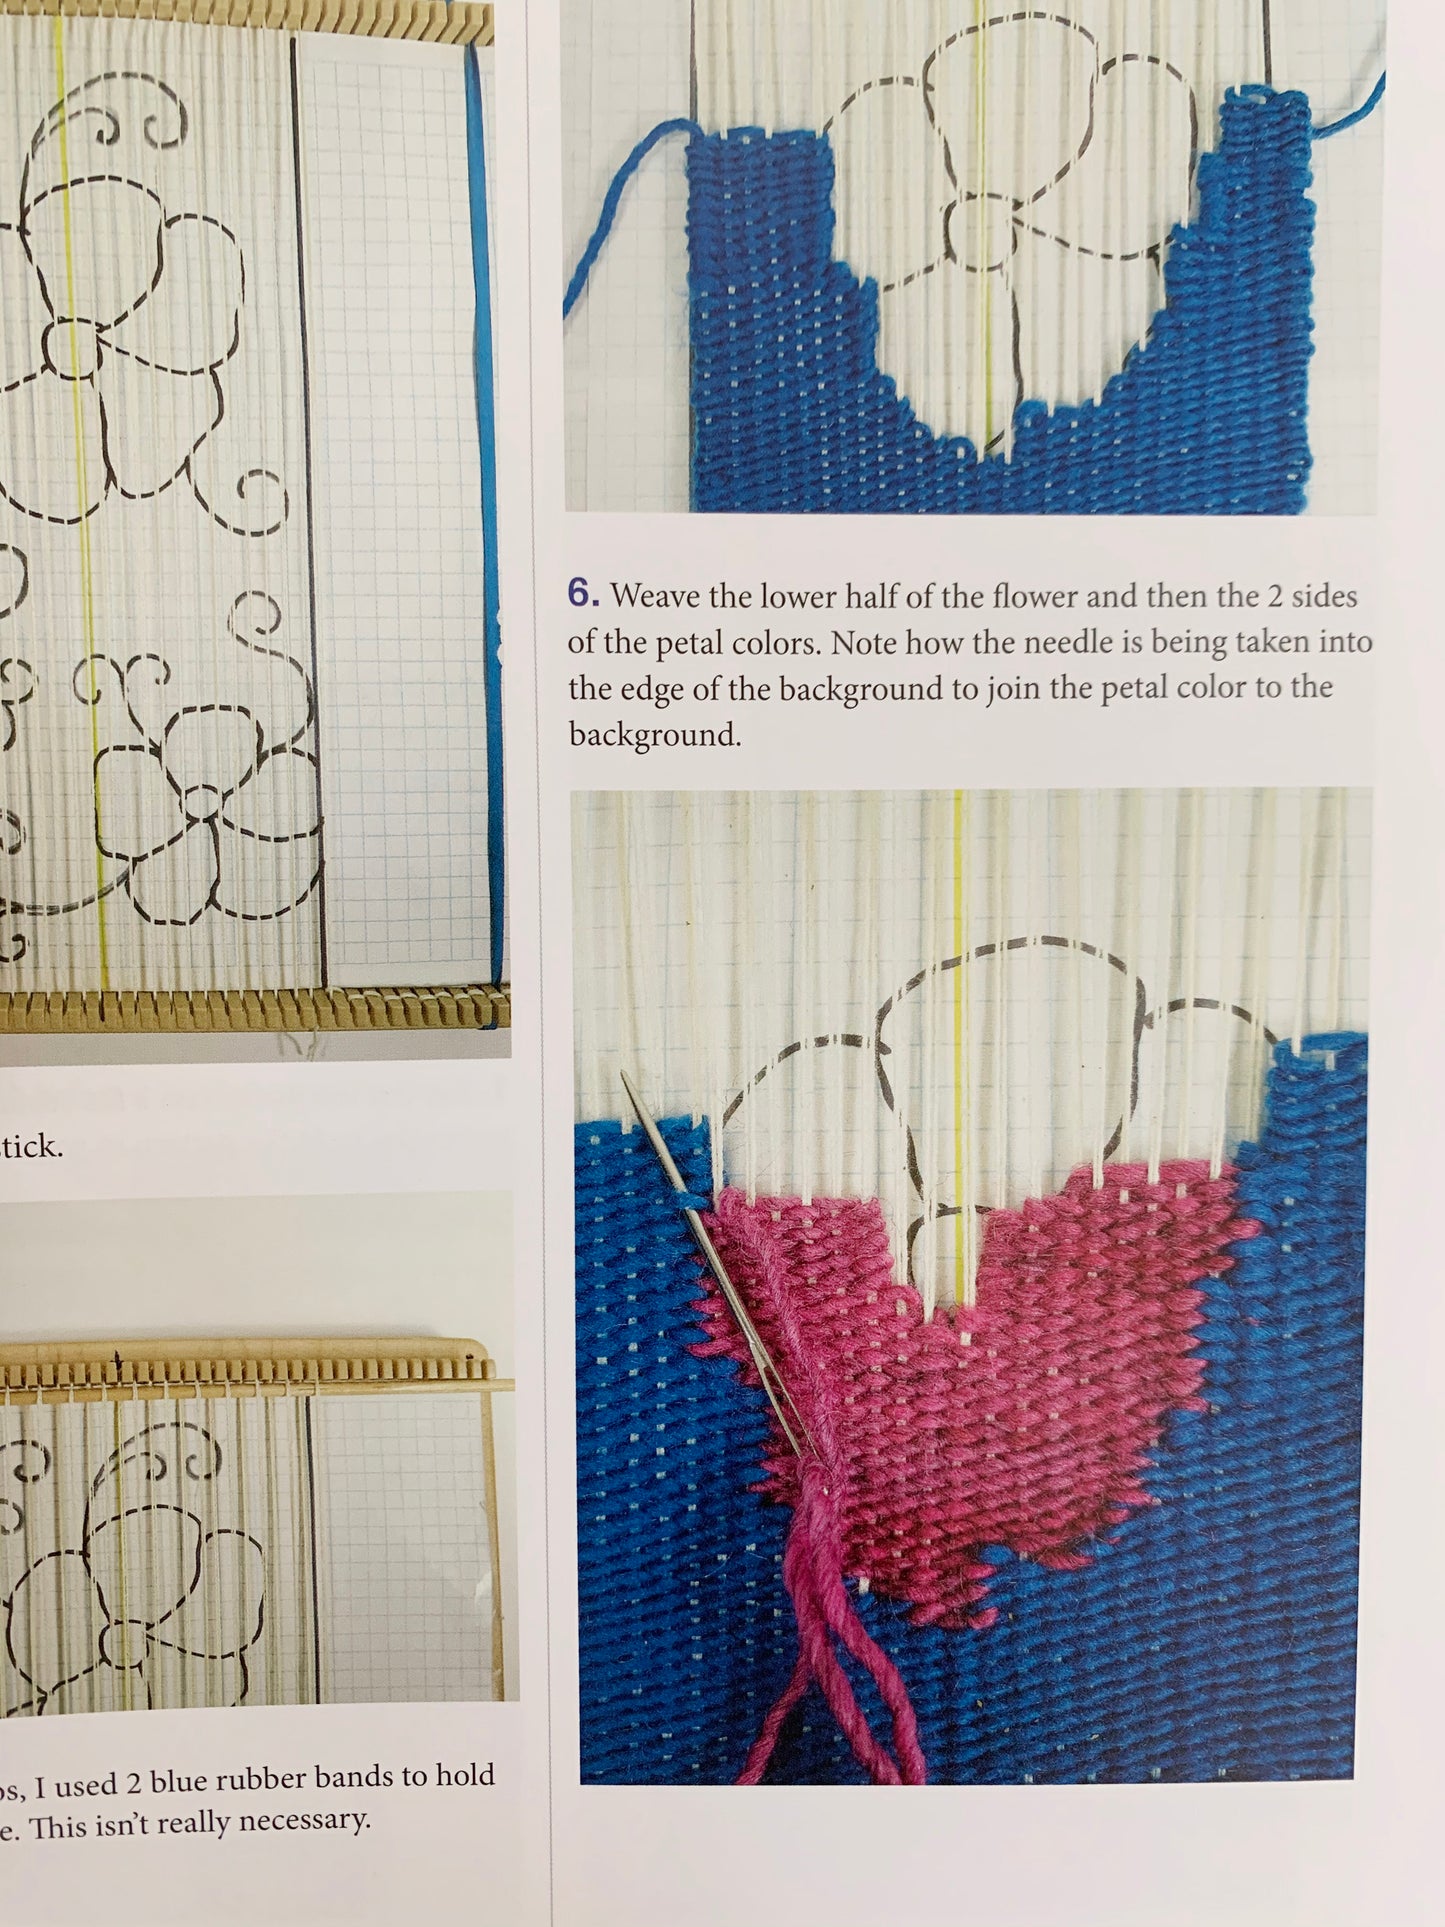 Innovative Weaving on The Frame Loom by Noreen Crone-Findlay